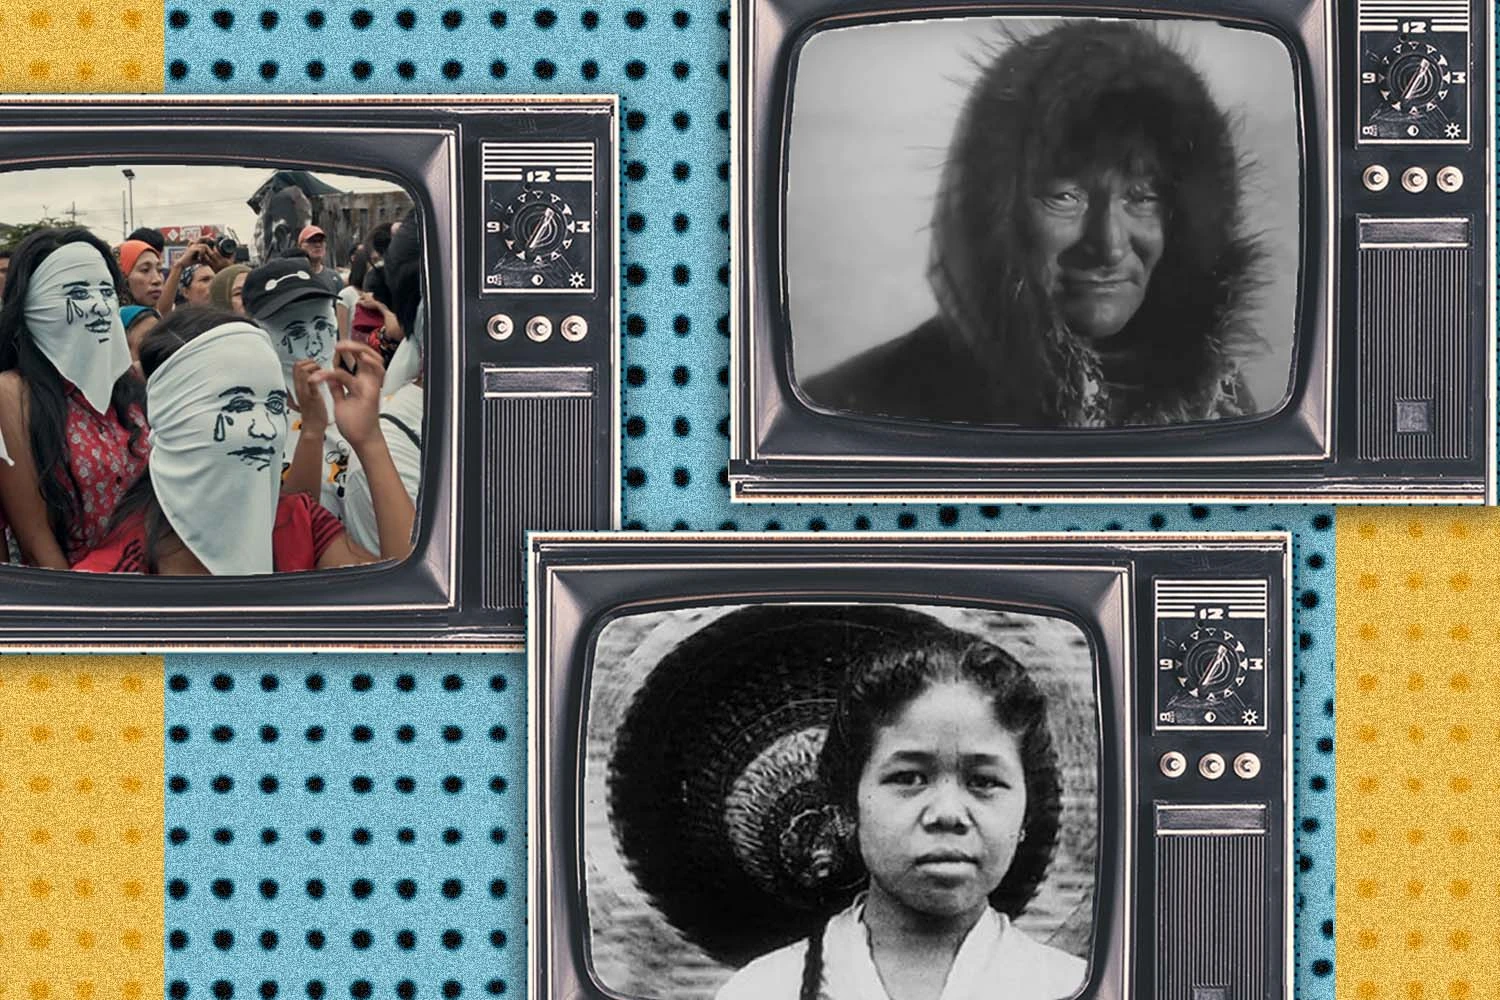 Shots from “Aswang,” “Nanook” and “Welt Spiegel Kinoon” for a blog on six documentary types and their value in storytelling.